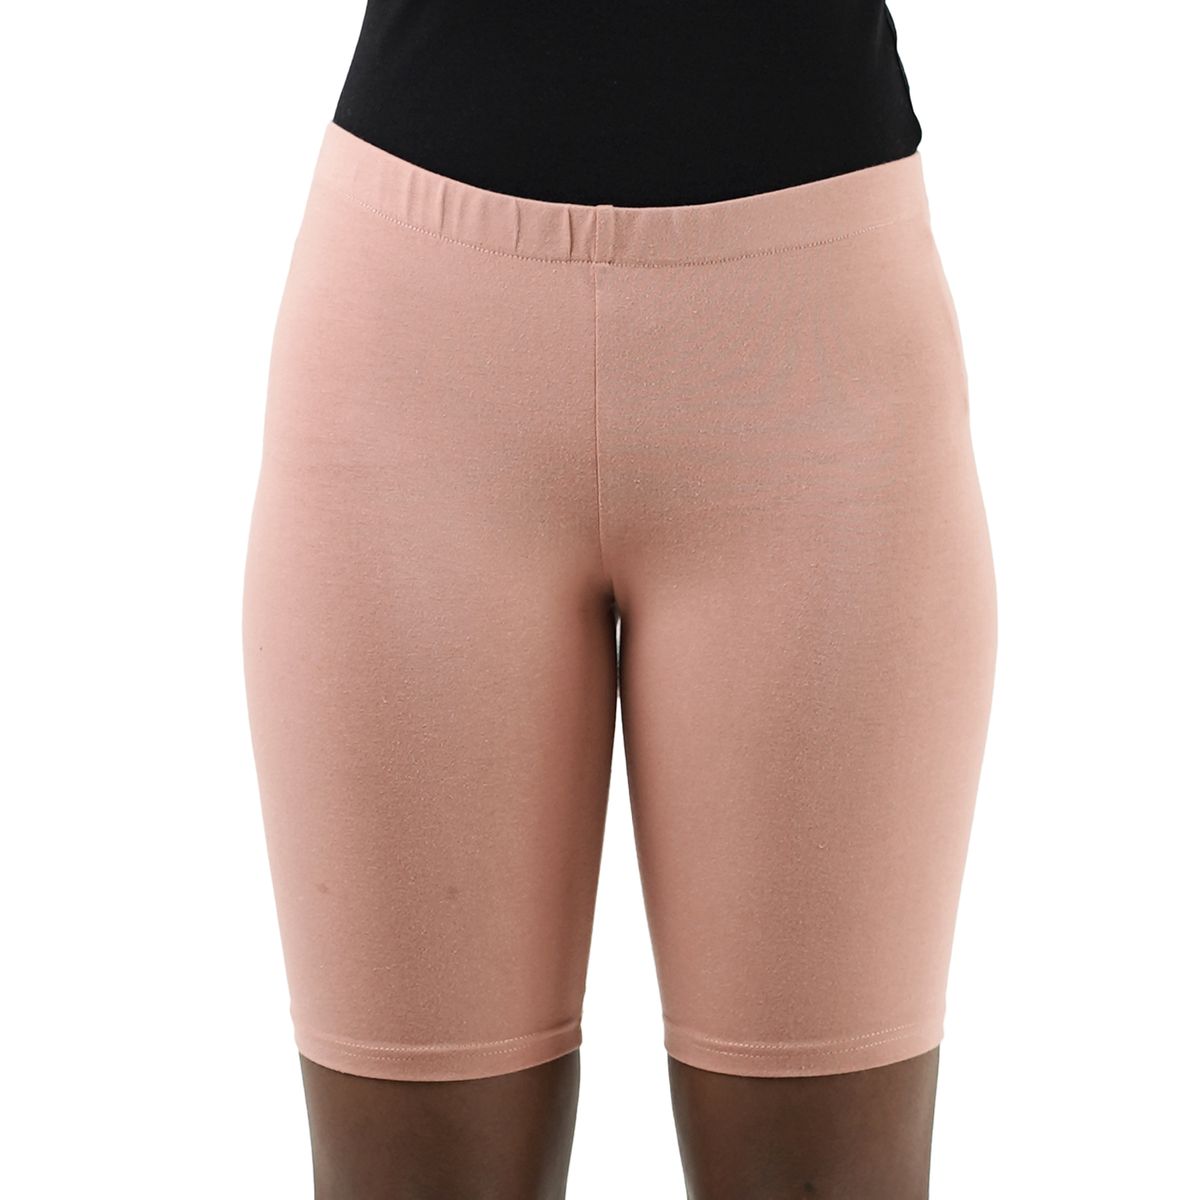 Unbranded Girls Short Leggings Pink, Shop Today. Get it Tomorrow!